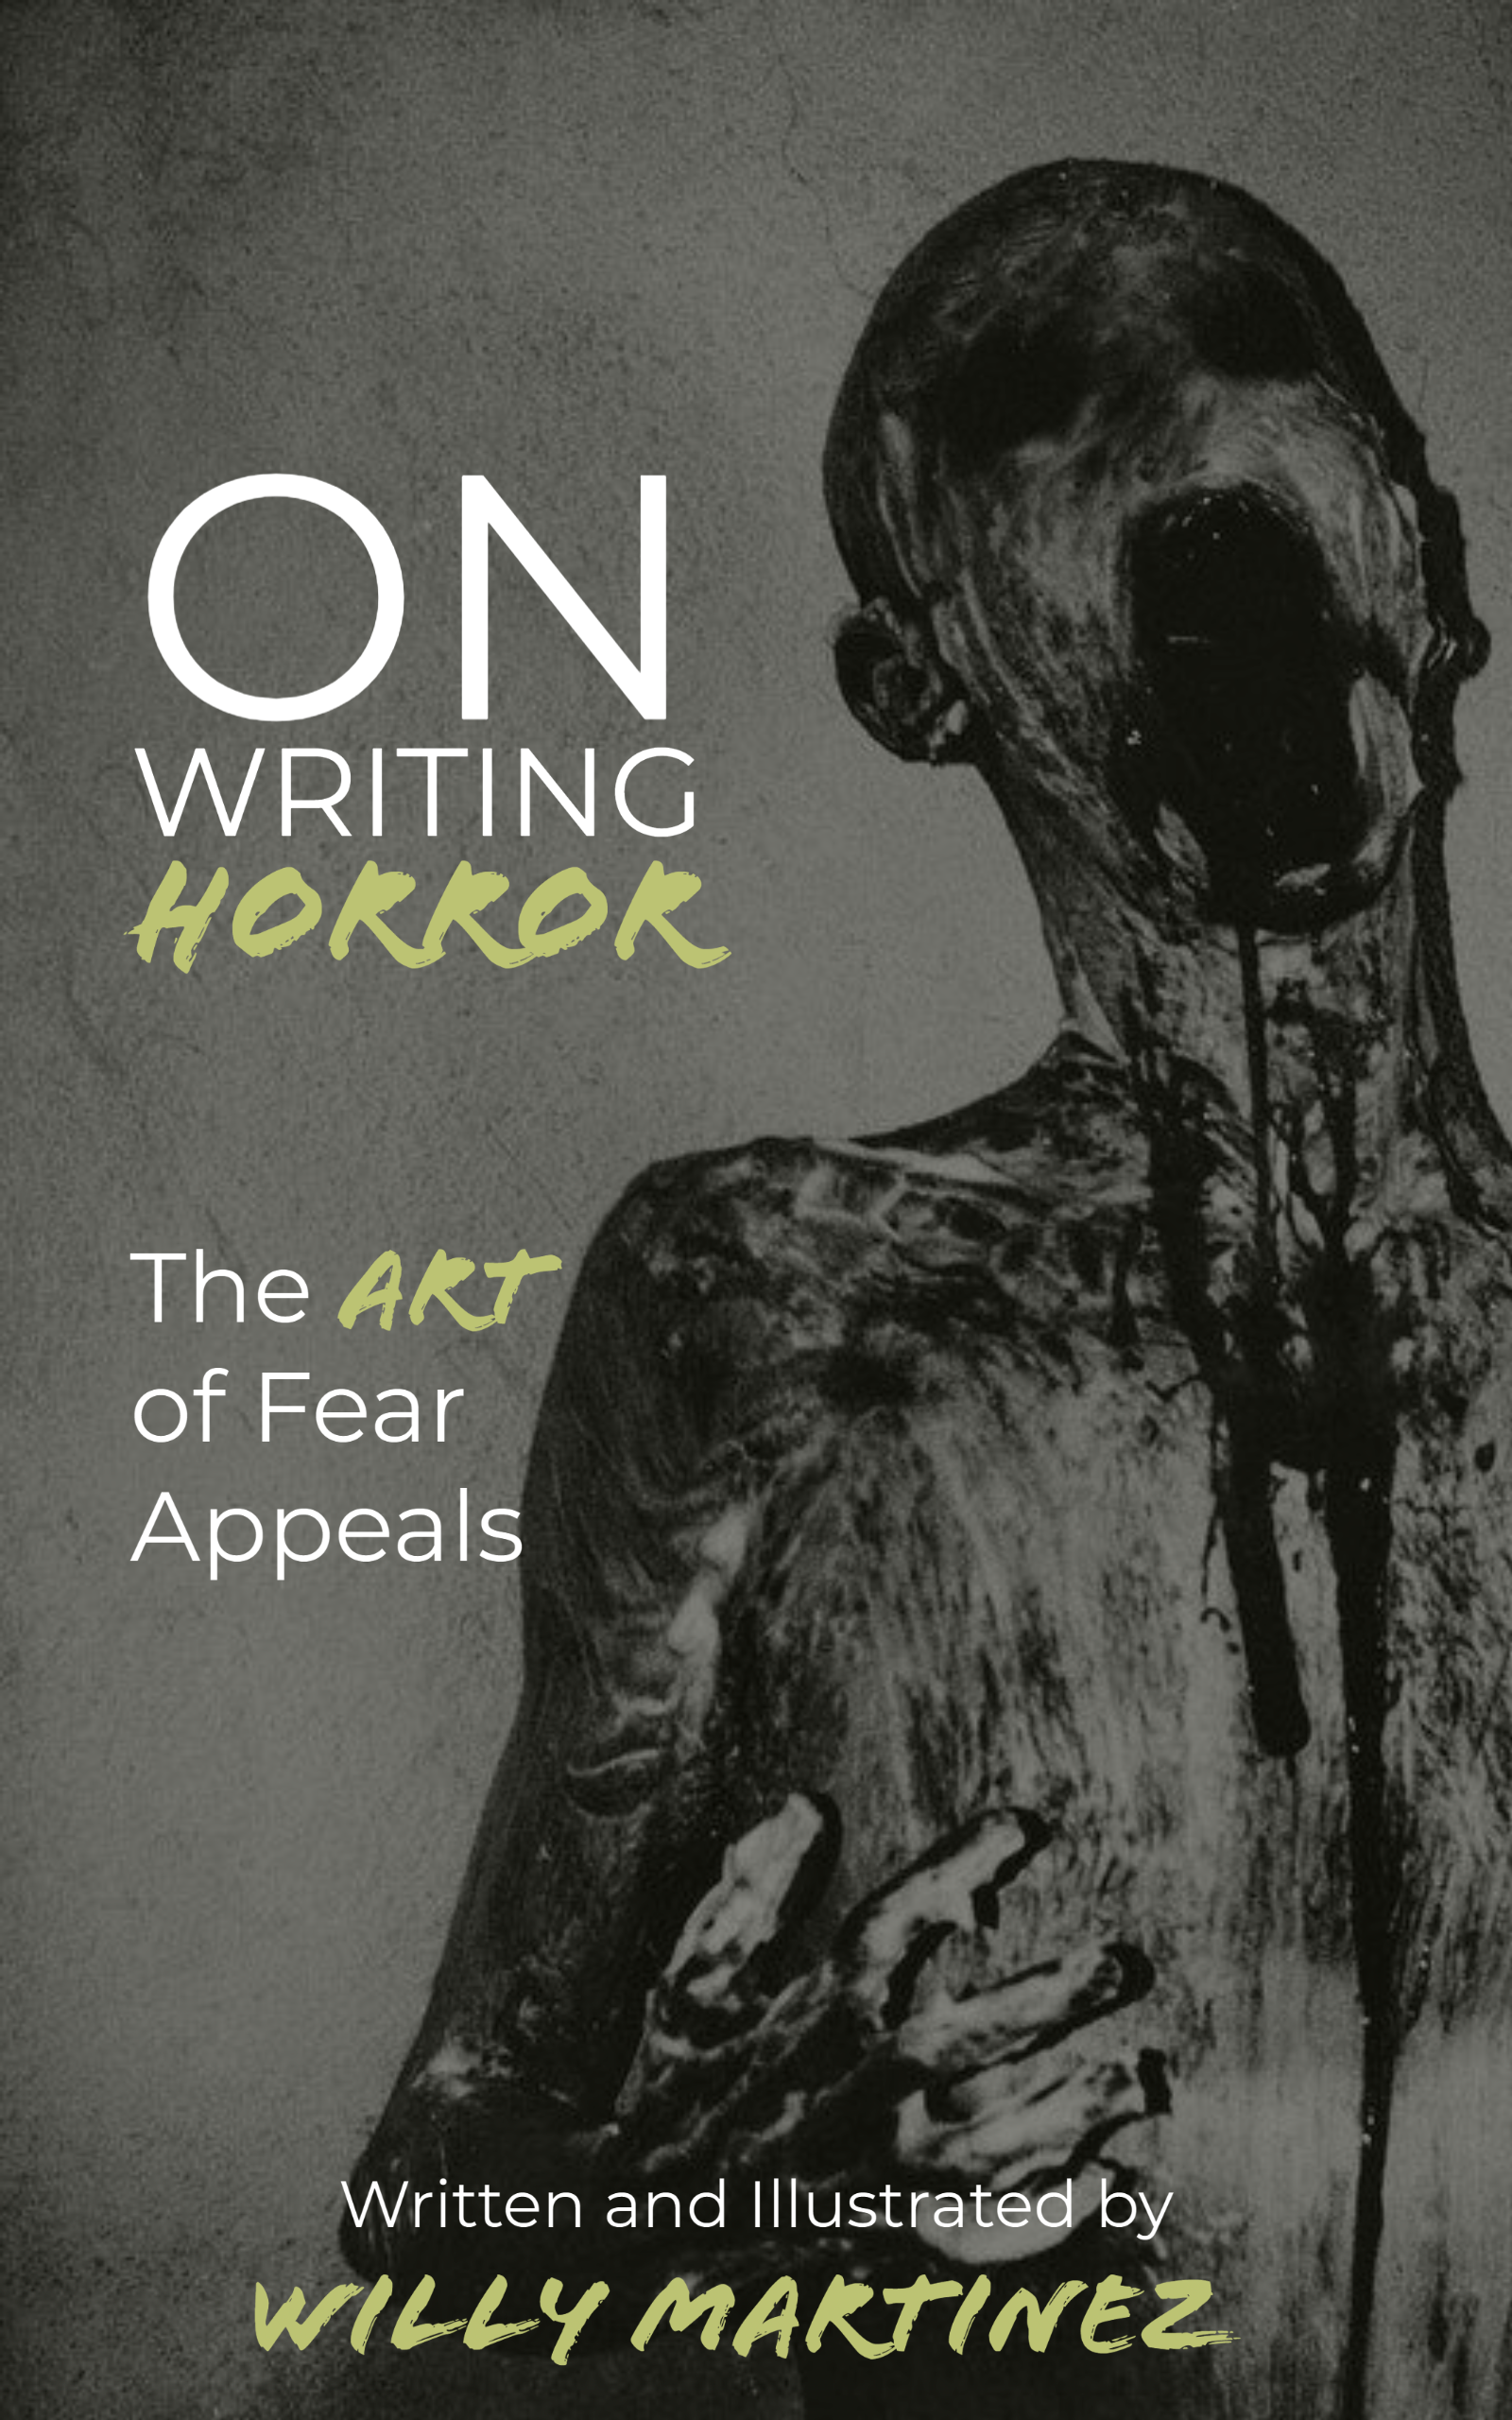 On Writing Horror: The Art of Fear Appeals